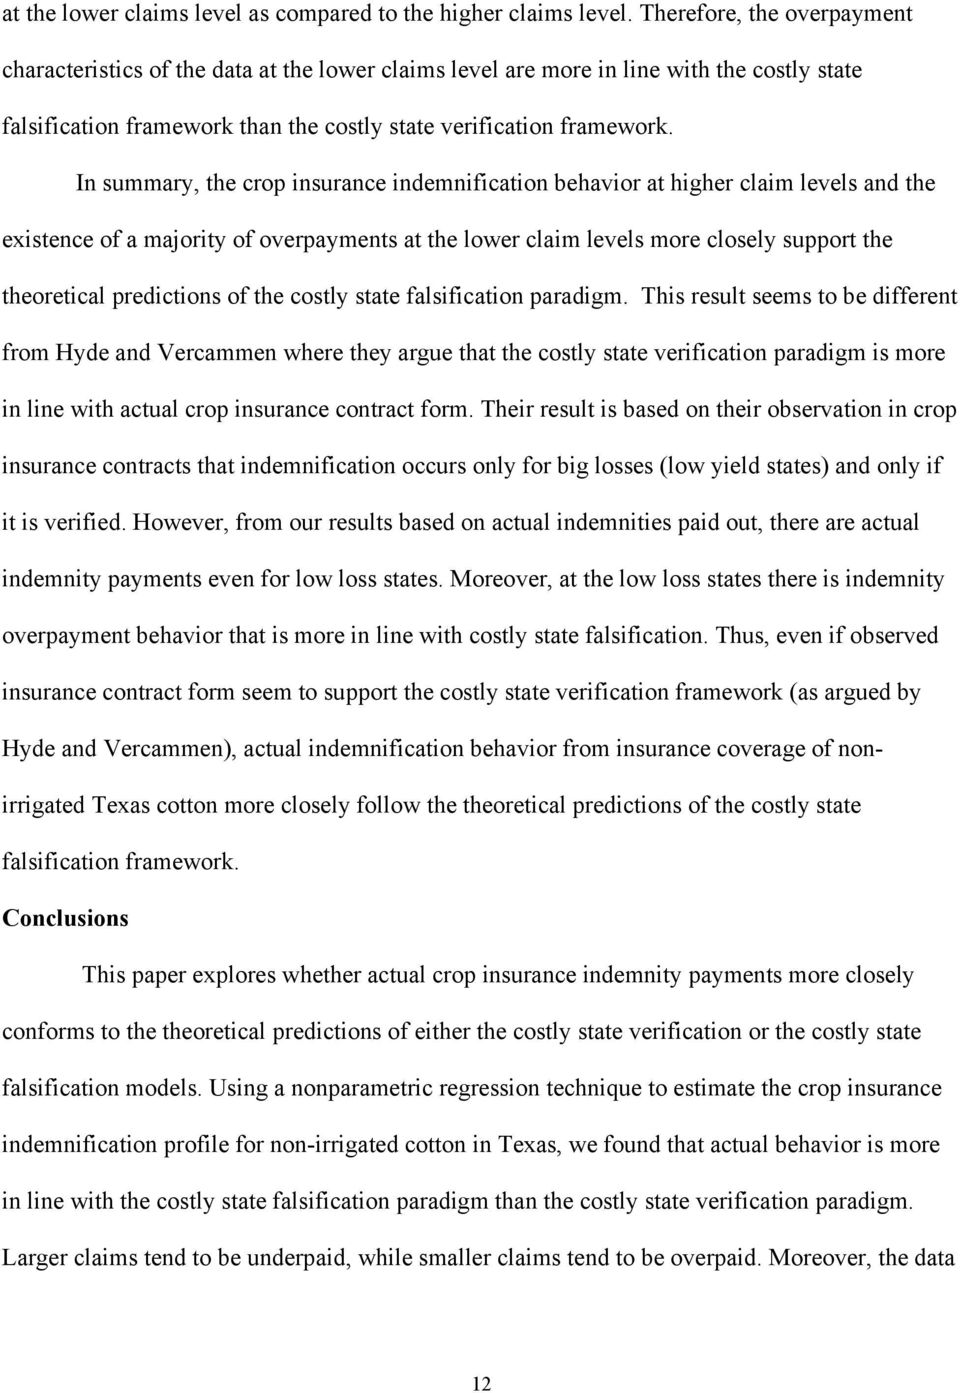 In summary, the crop insurance indemnification behavior at higher claim levels and the existence of a majority of overpayments at the lower claim levels more closely support the theoretical